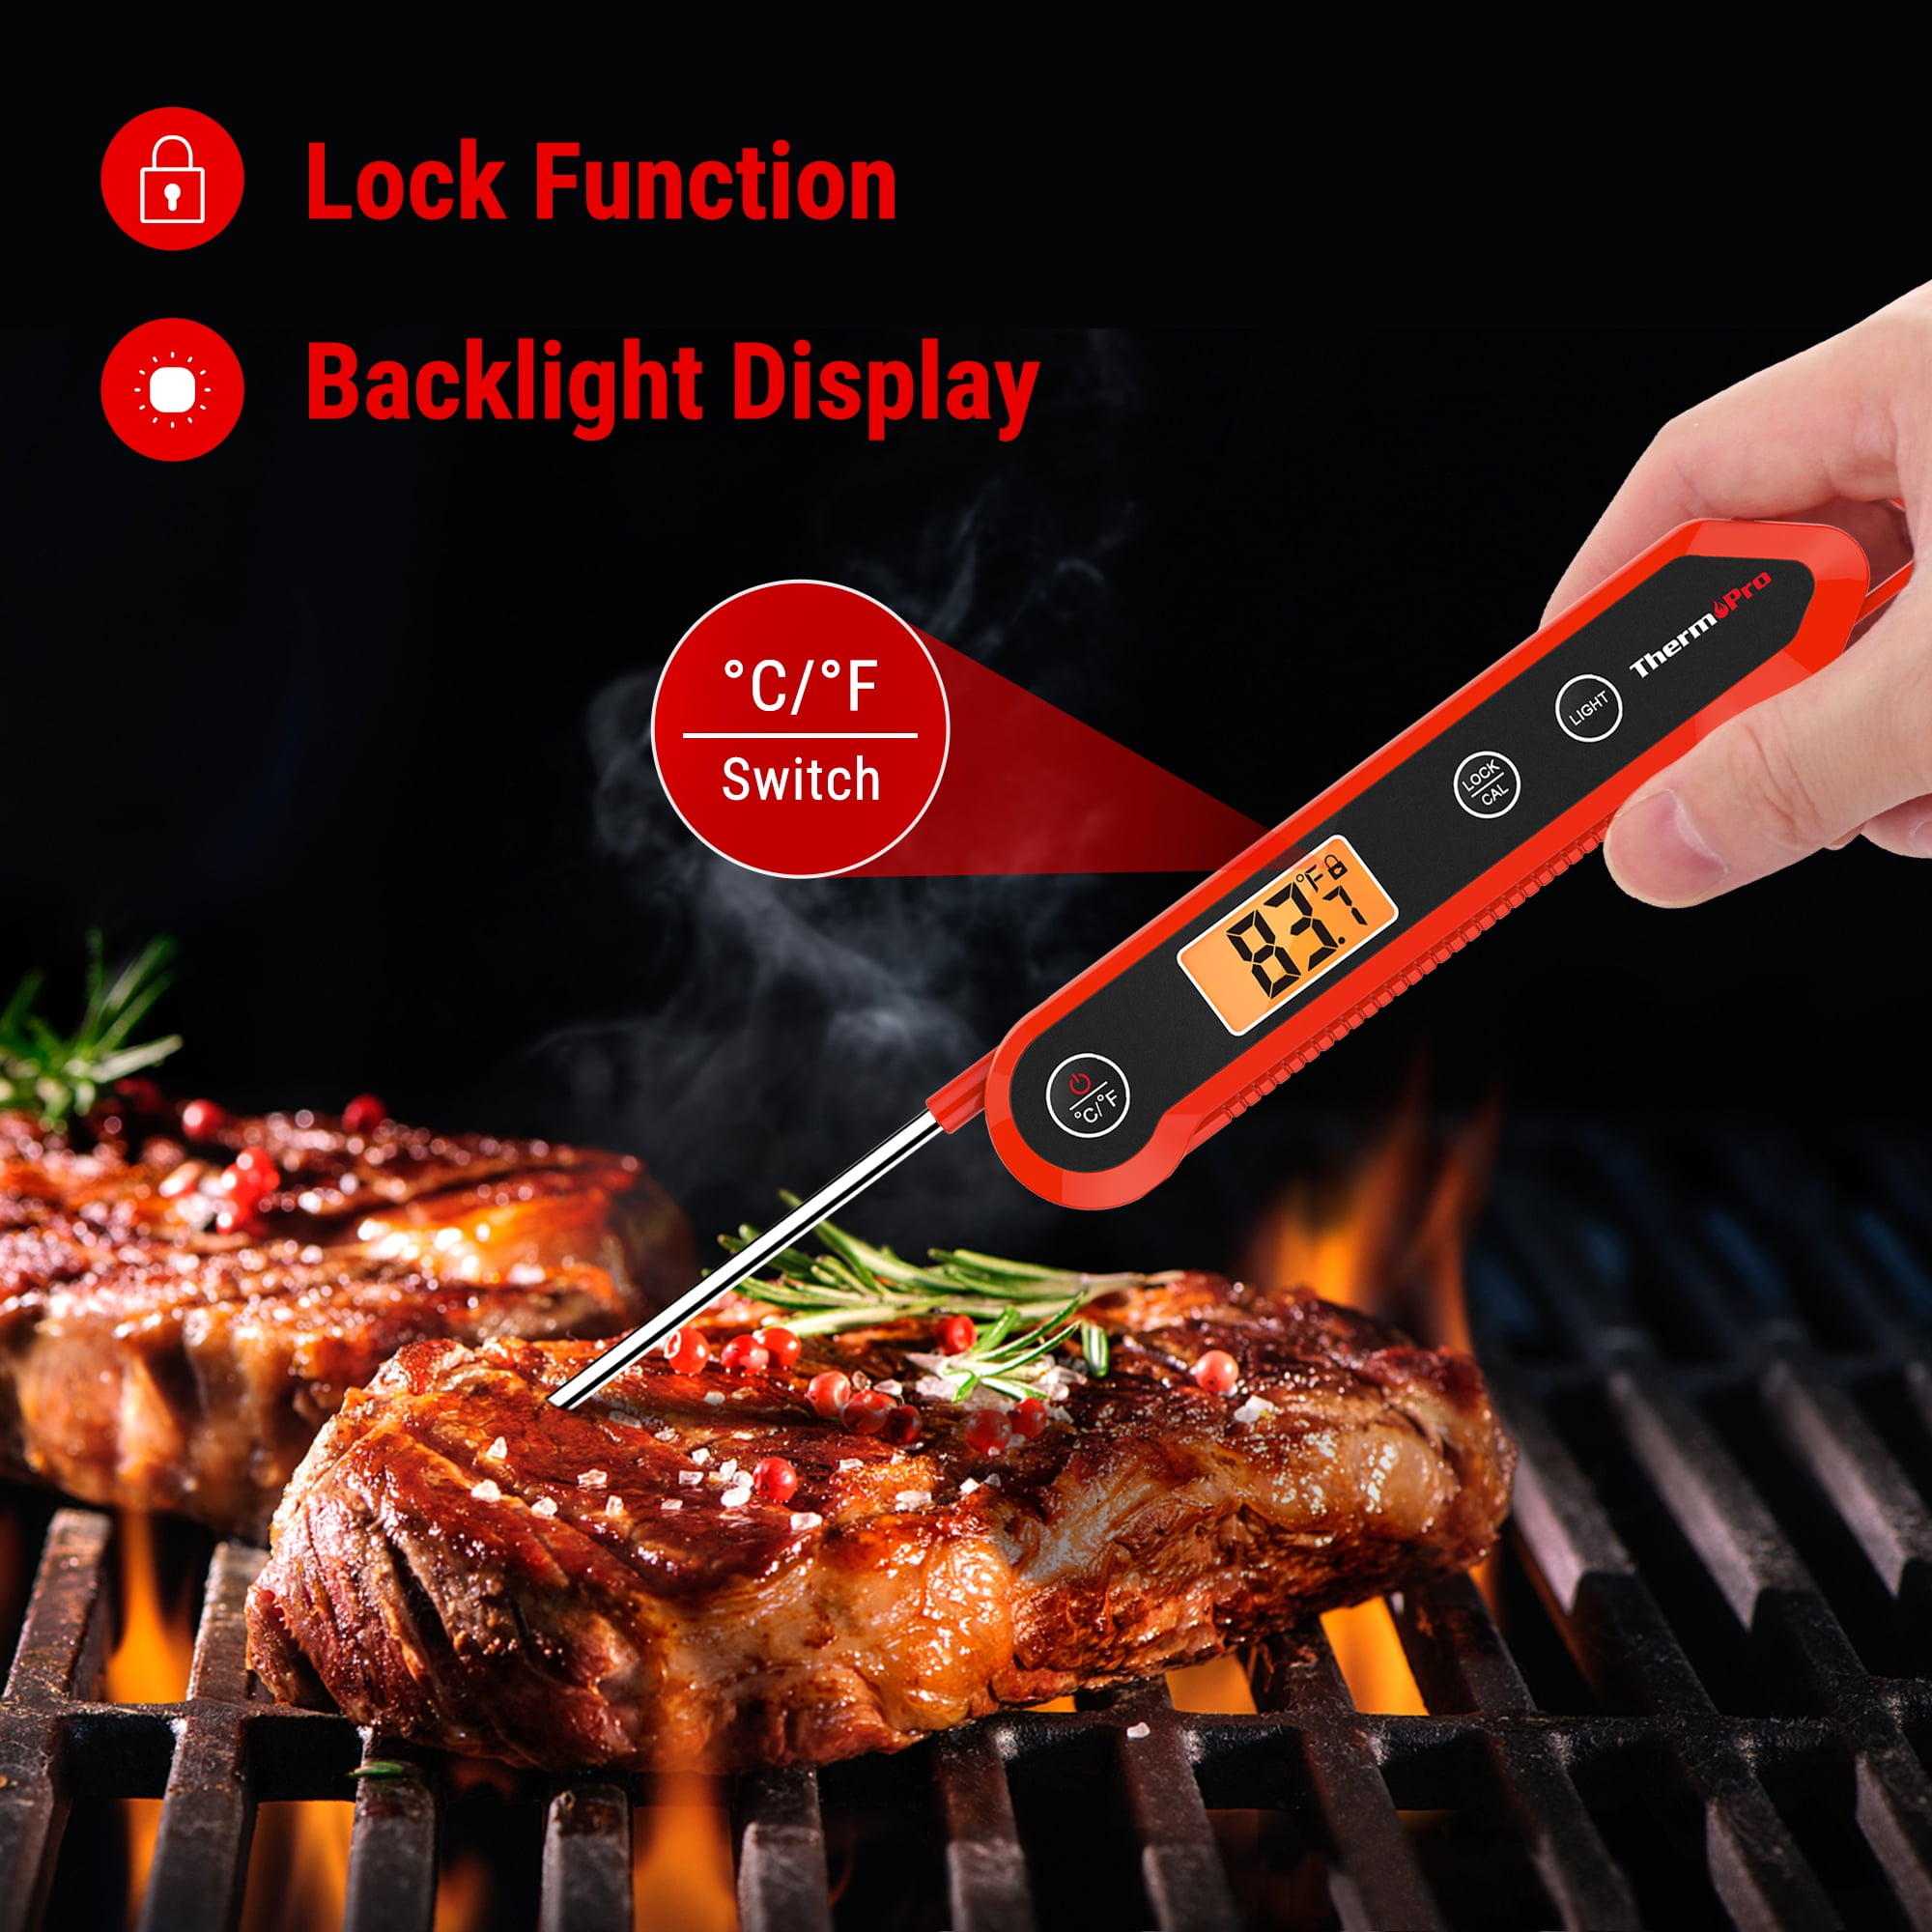 ThermoPro - It's Saturday and there's no better day to get grilling!  🔥🔥🔥Buy the TP289 meat thermometer and make perfectly cooked meat your  guests will love! 😍Click here:  tp829-super-long-range-wireless